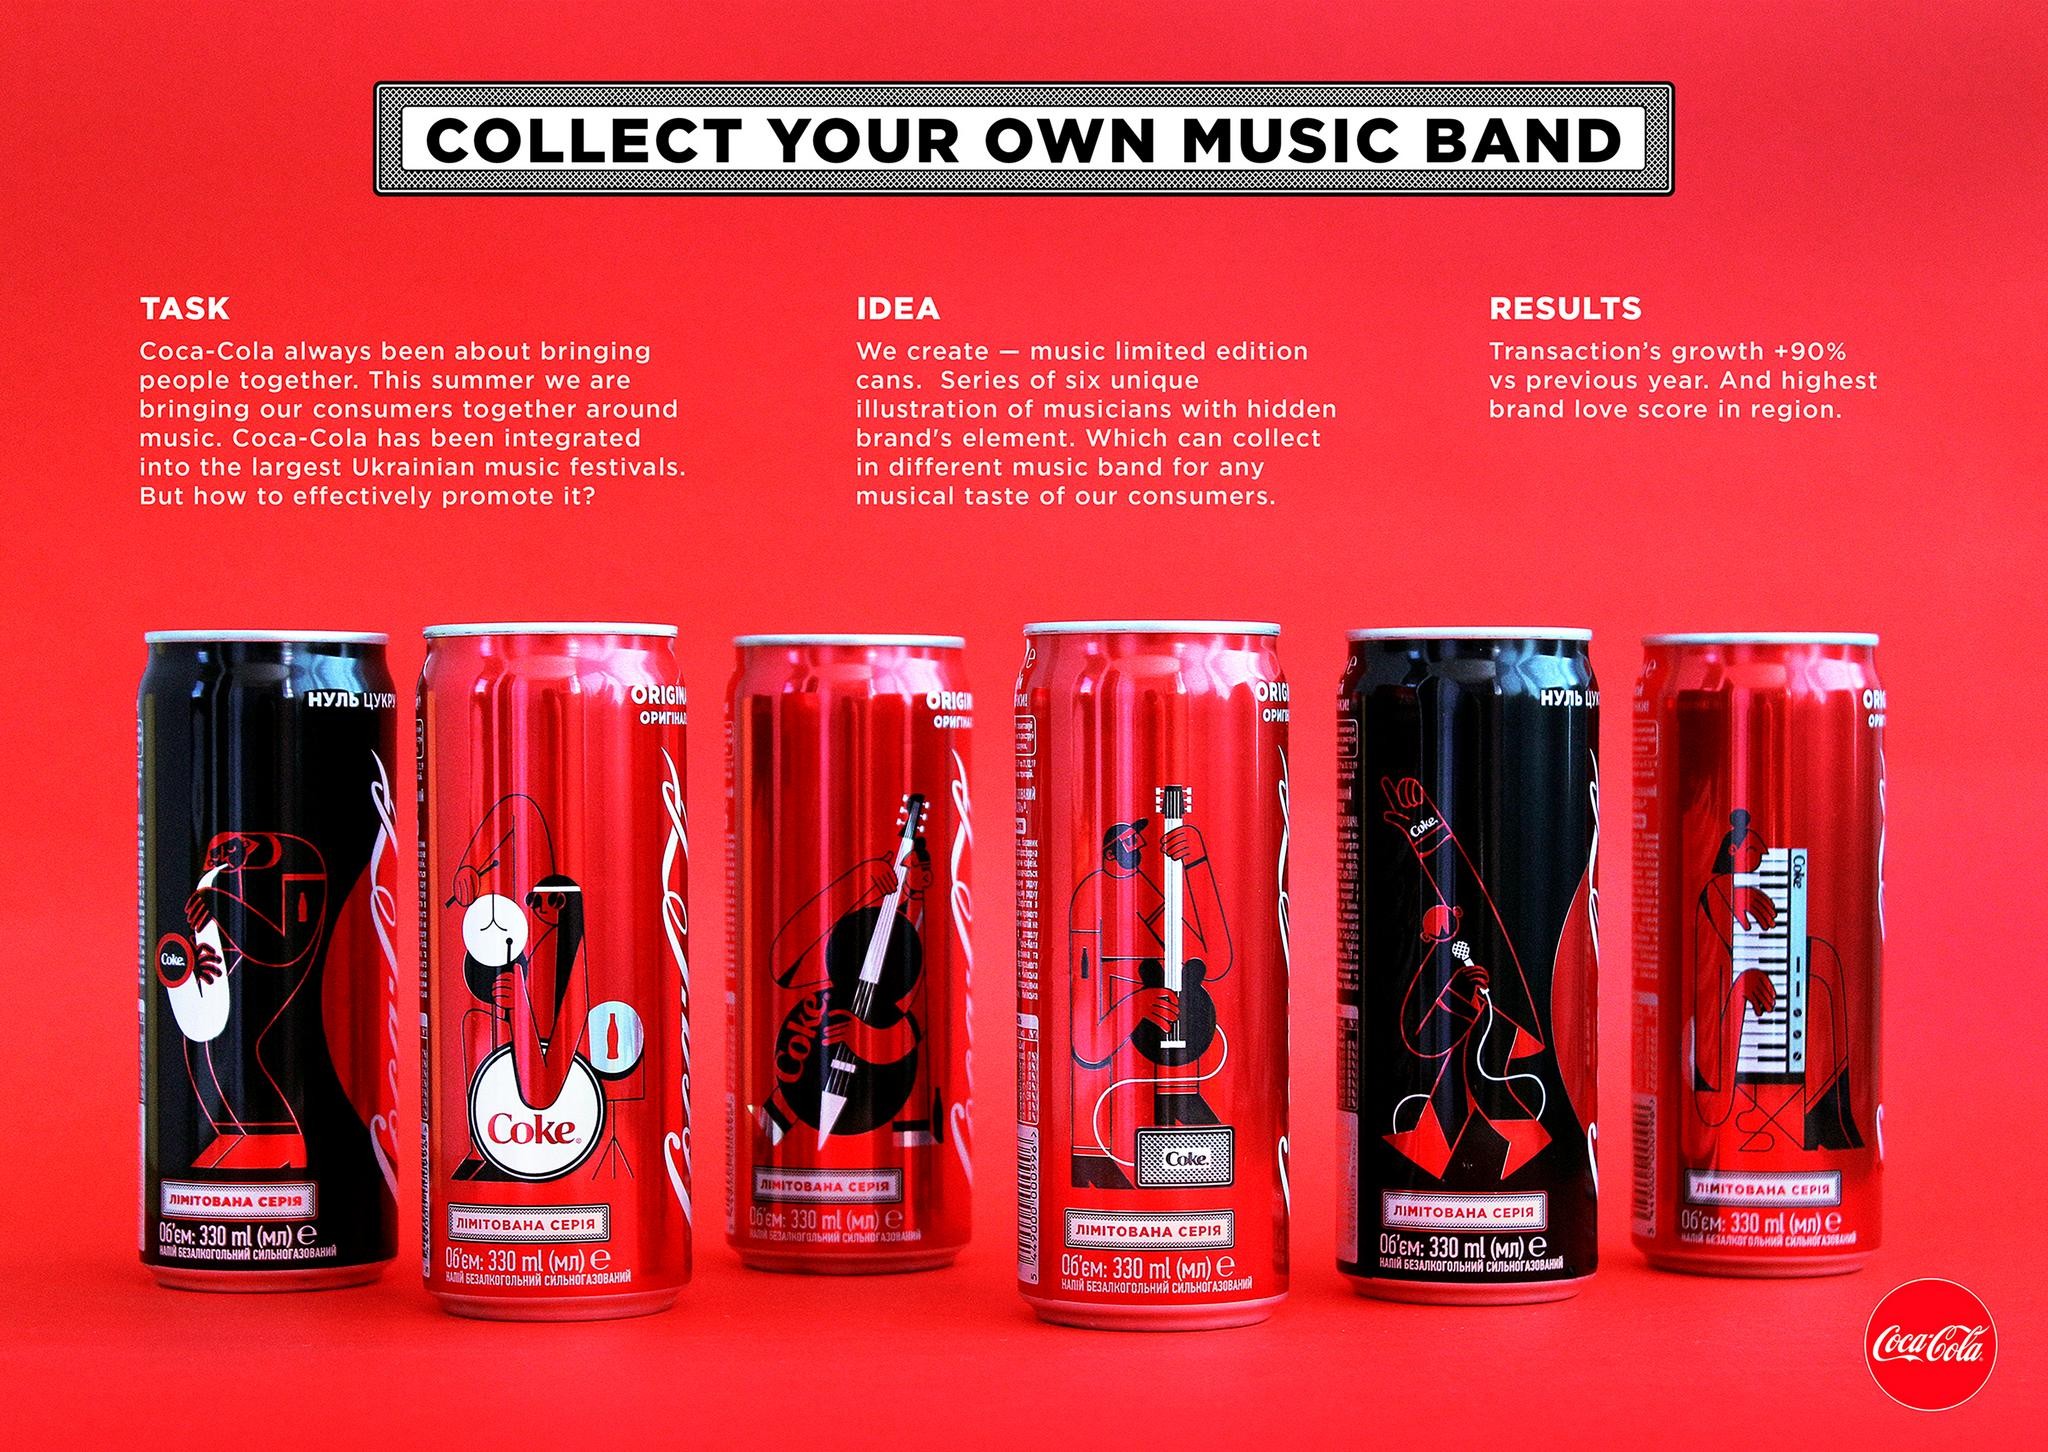 COLLECT YOUR OWN MUSIC BAND